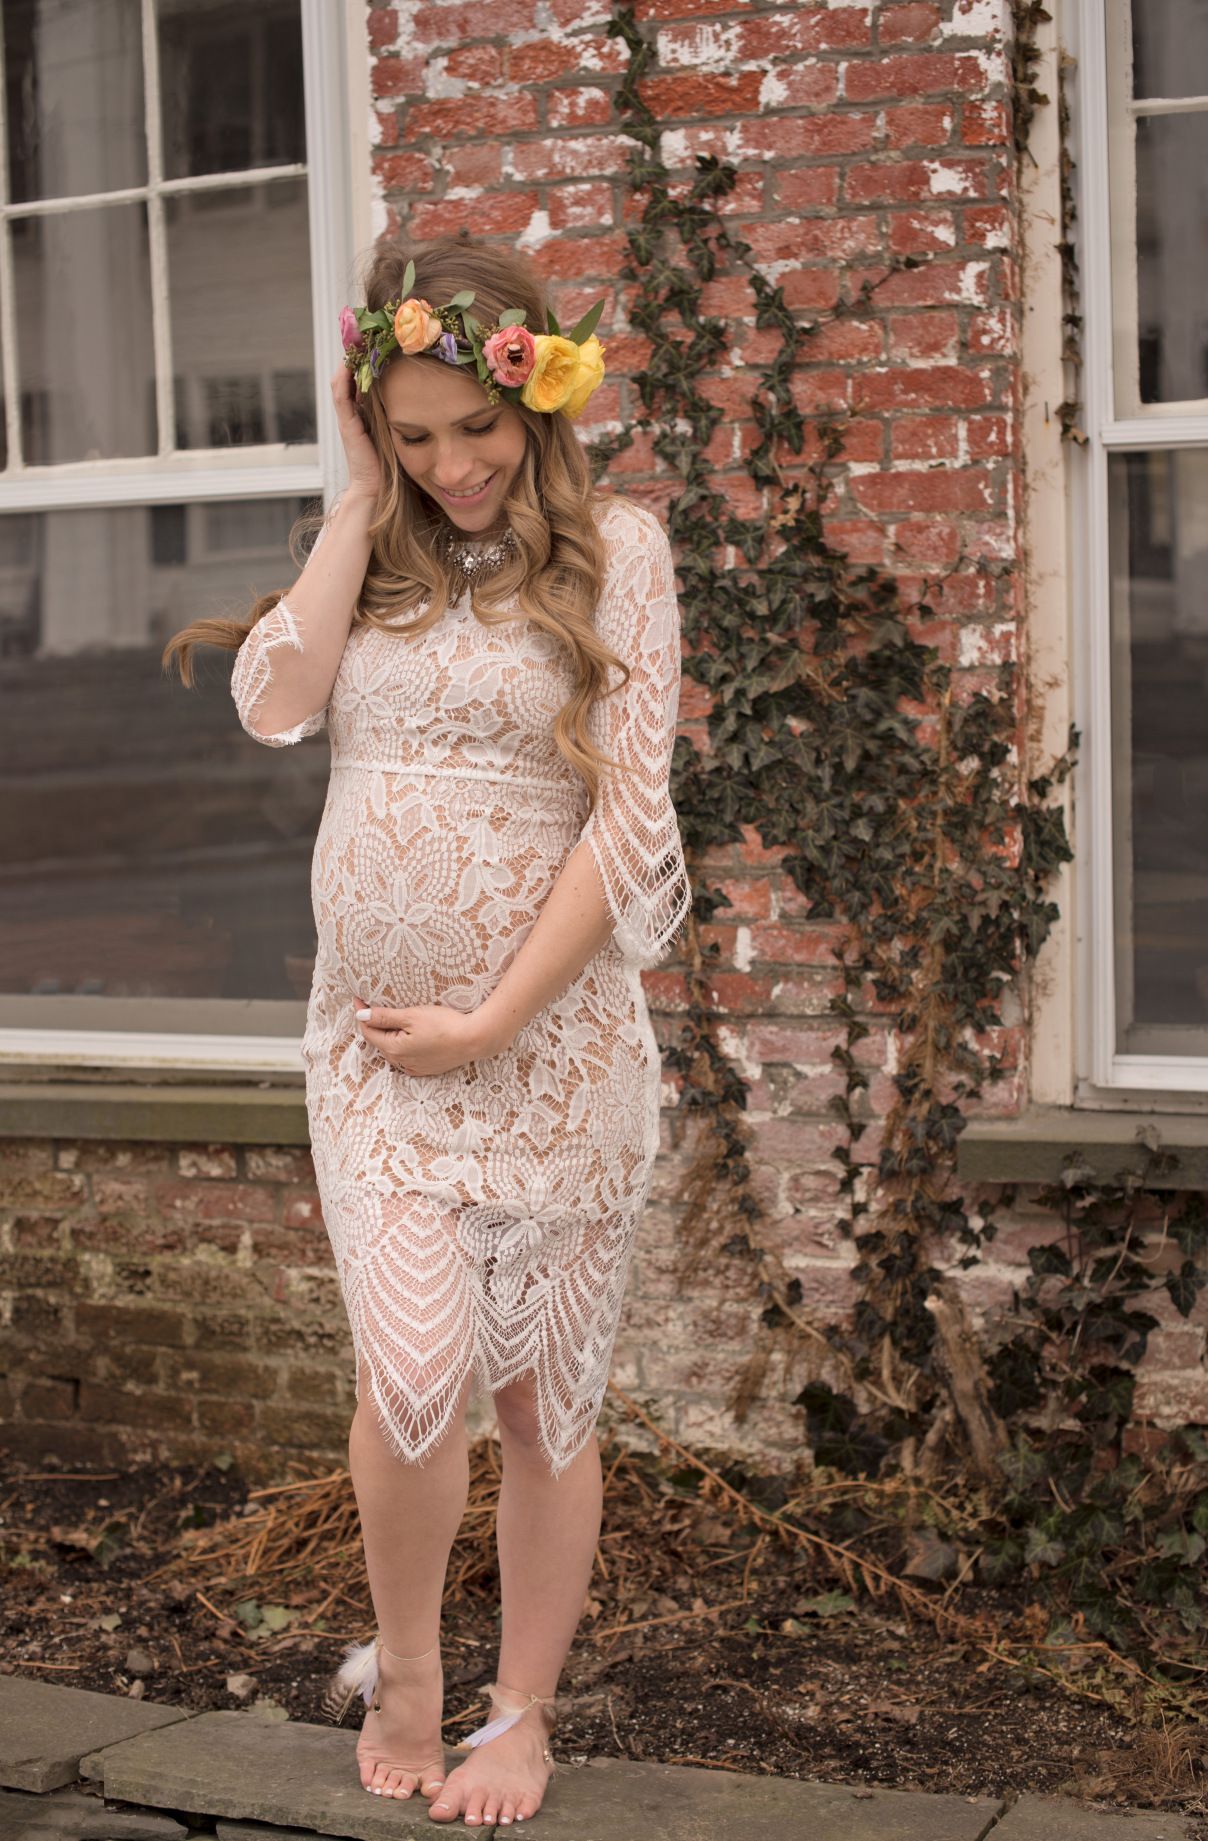 Full Size of Baby Shower:alluring Baby Shower Dresses Baby Shower Dresses Cute Inexpensive Maternity Clothes Maternity Evening Gowns Plus Size Maternity Dresses For Baby Shower